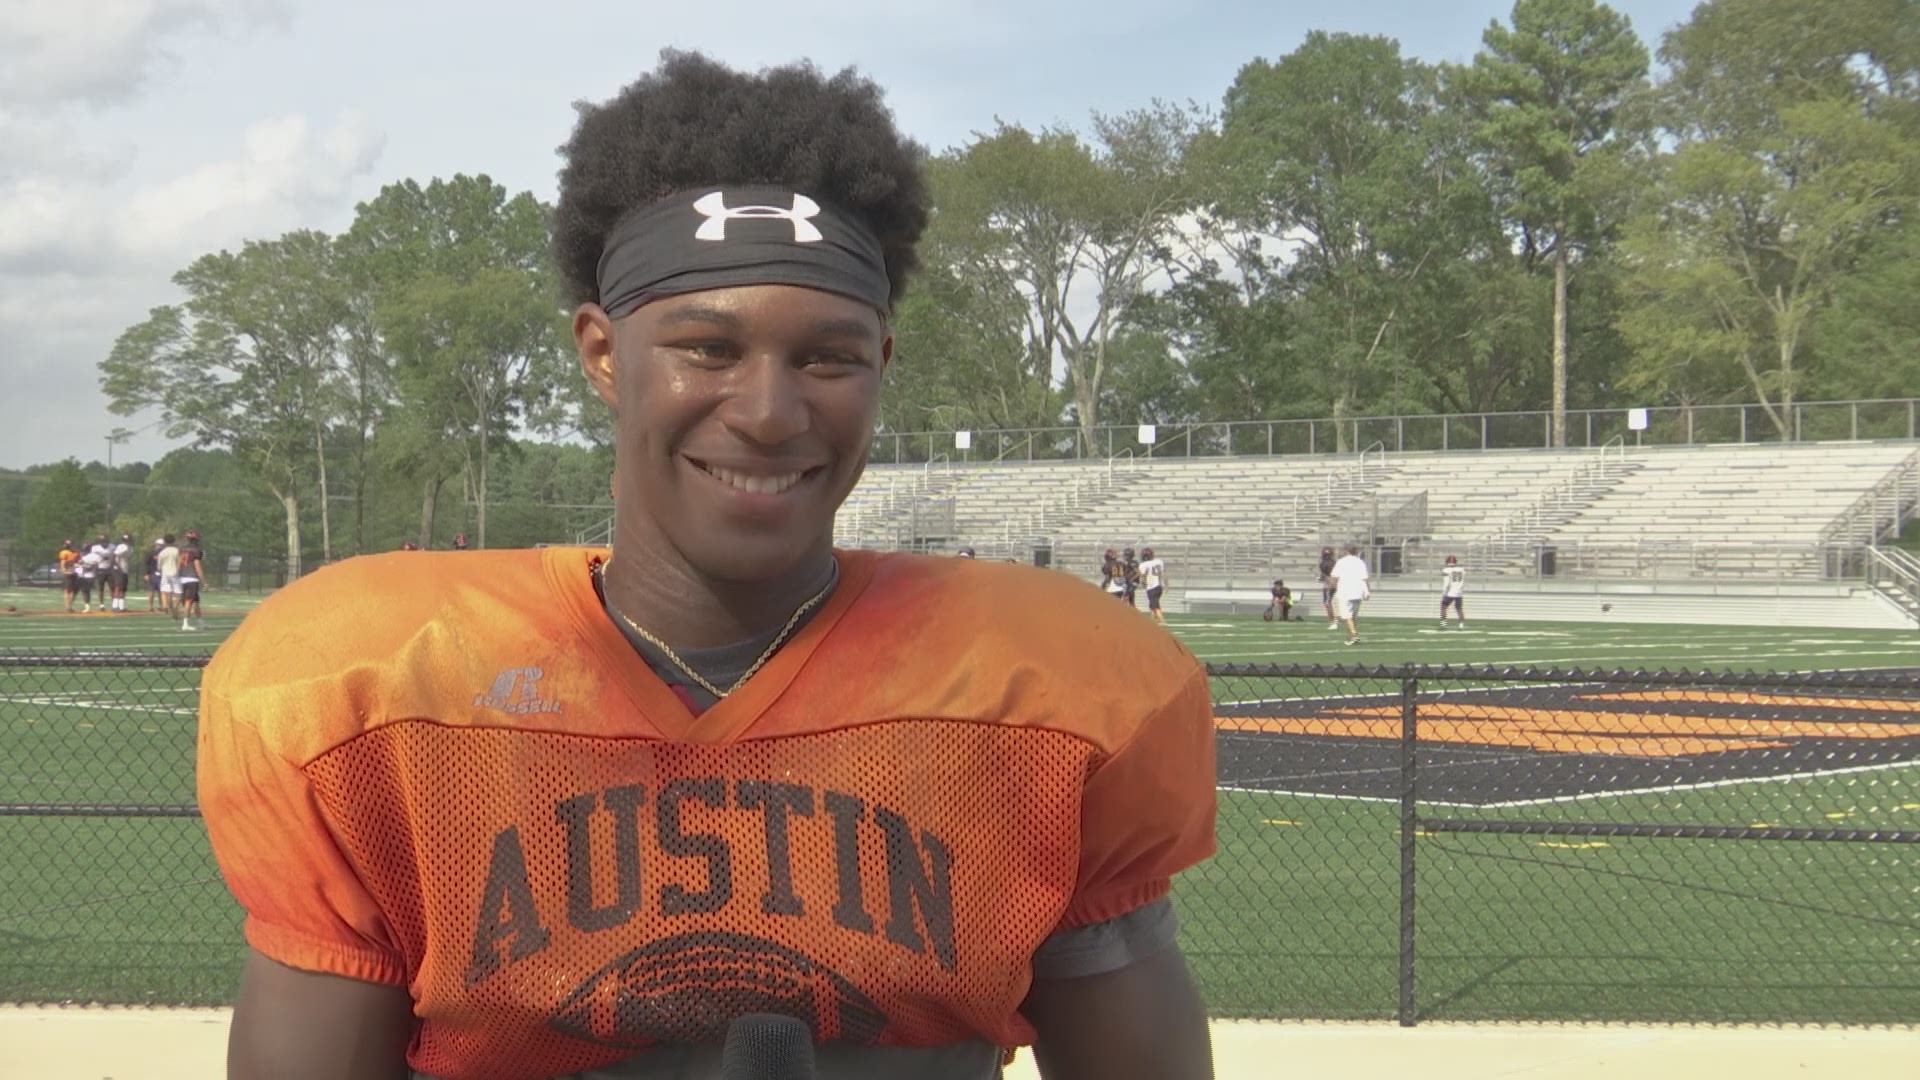 Quincy Crittendon helped lead Austin to their sixth-straight win over Decatur.